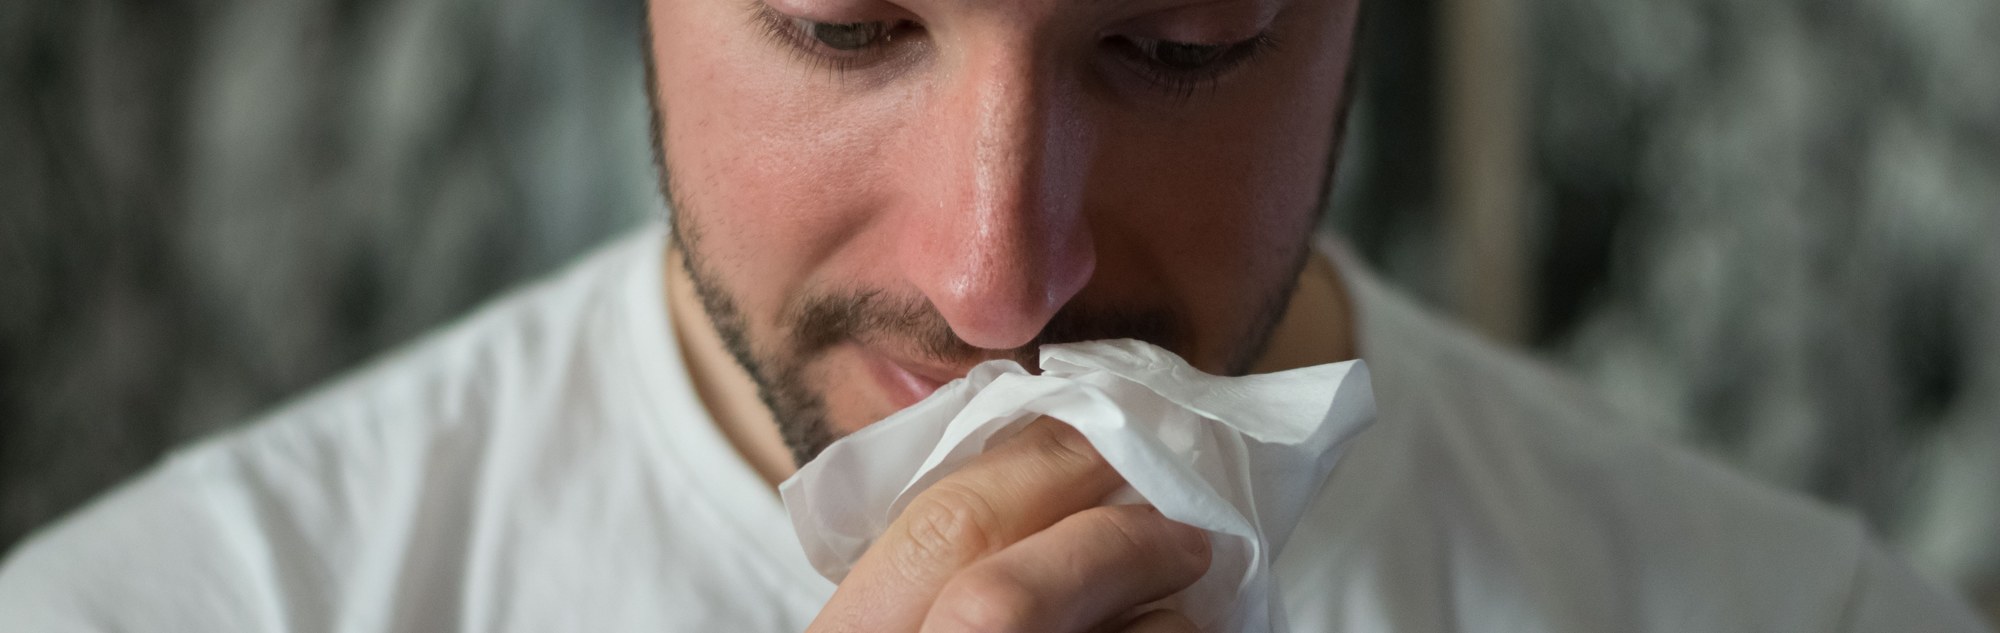 Bearded man with tissue in front of face